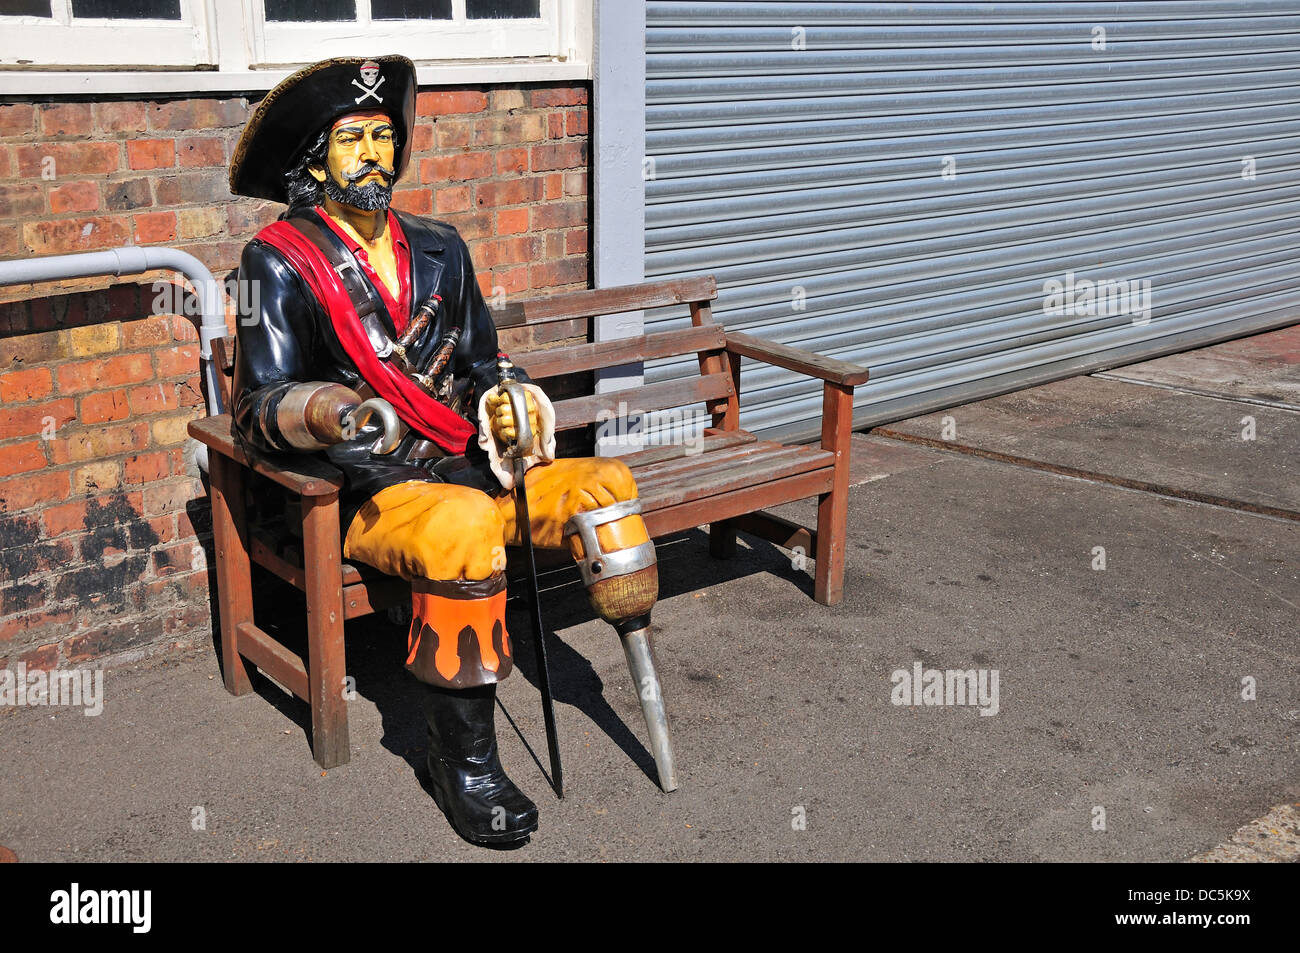 Peg Leg Pirate High Resolution Stock Photography and Images - Alamy